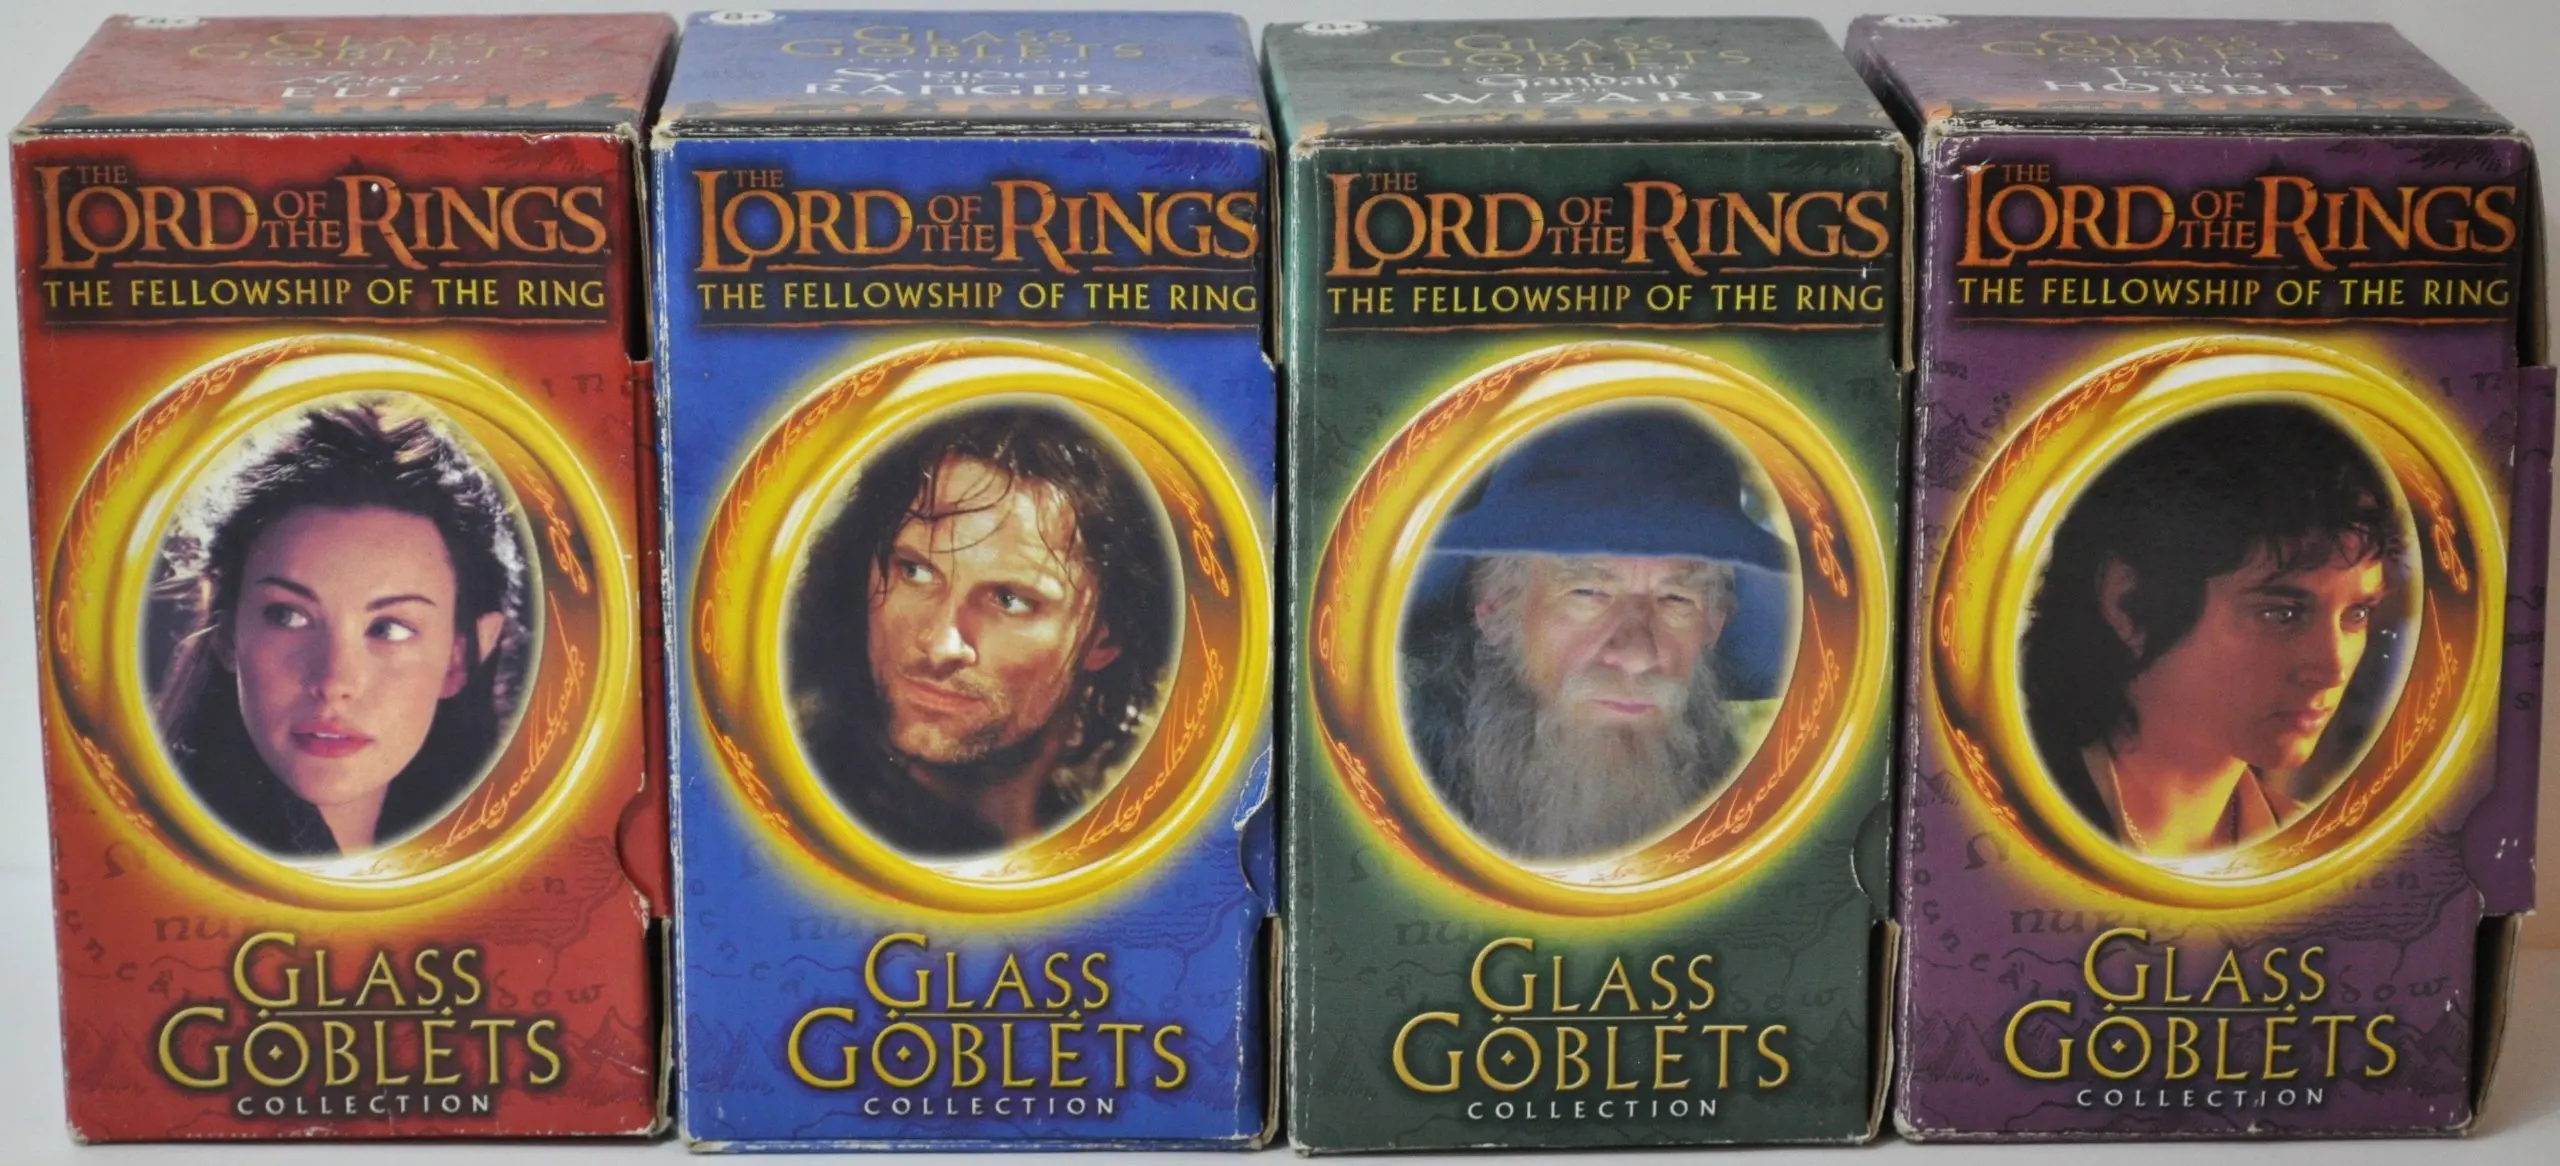 74.98. Lord of the Rings Complete Glass Goblet Collection (Burger King). 